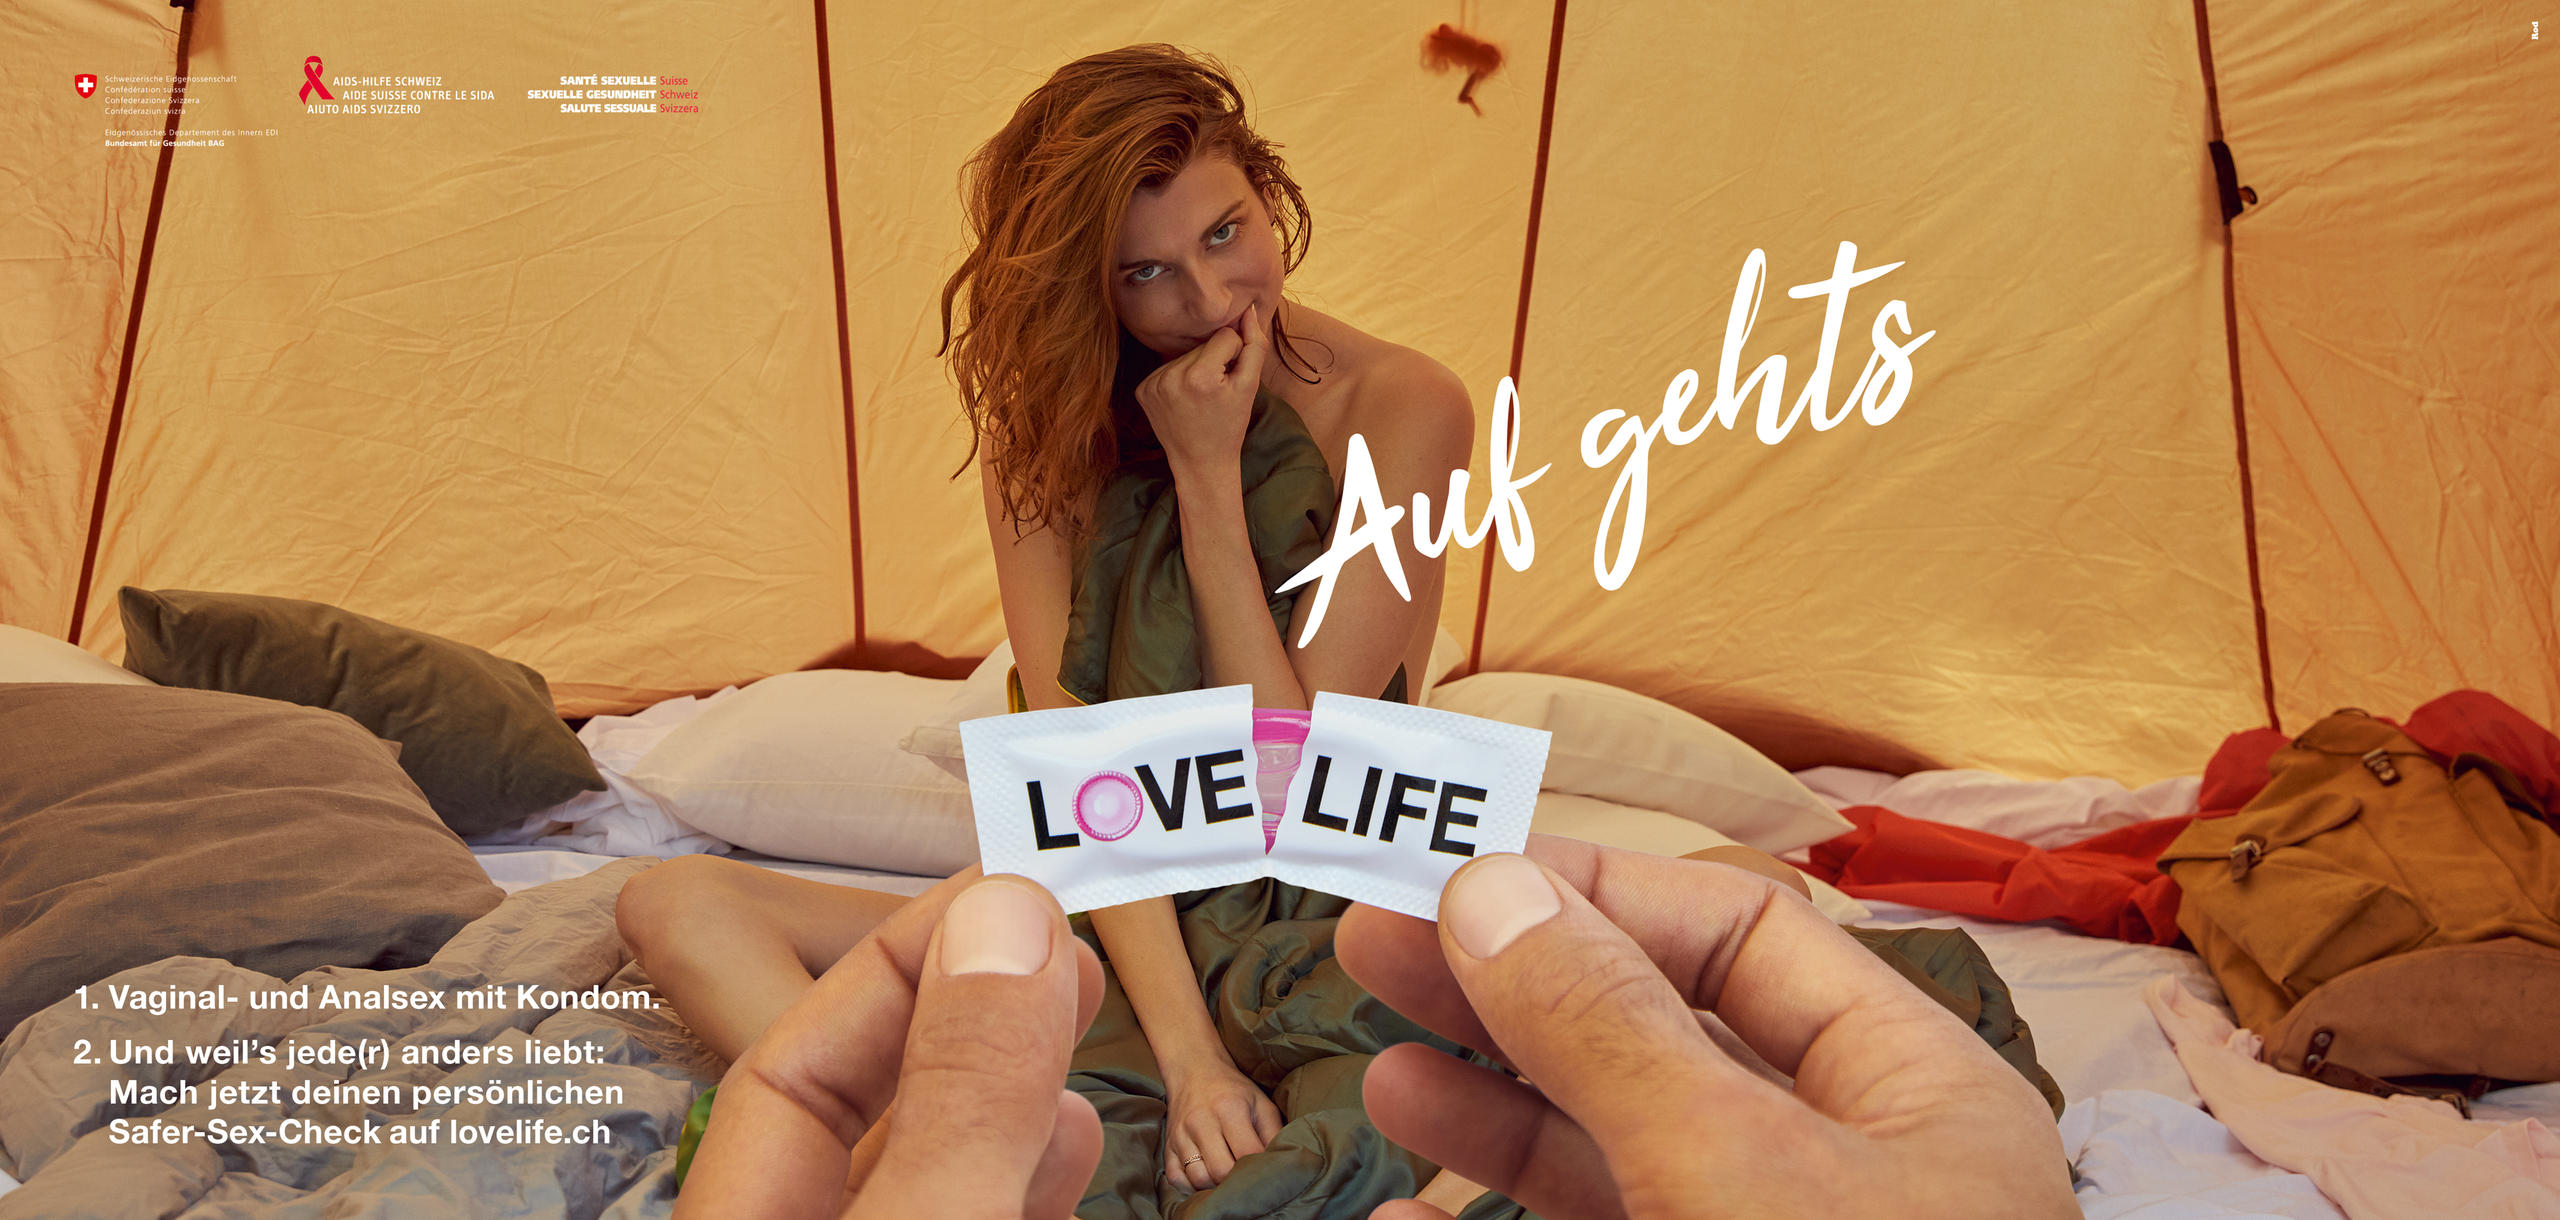 Love Life campaign poster